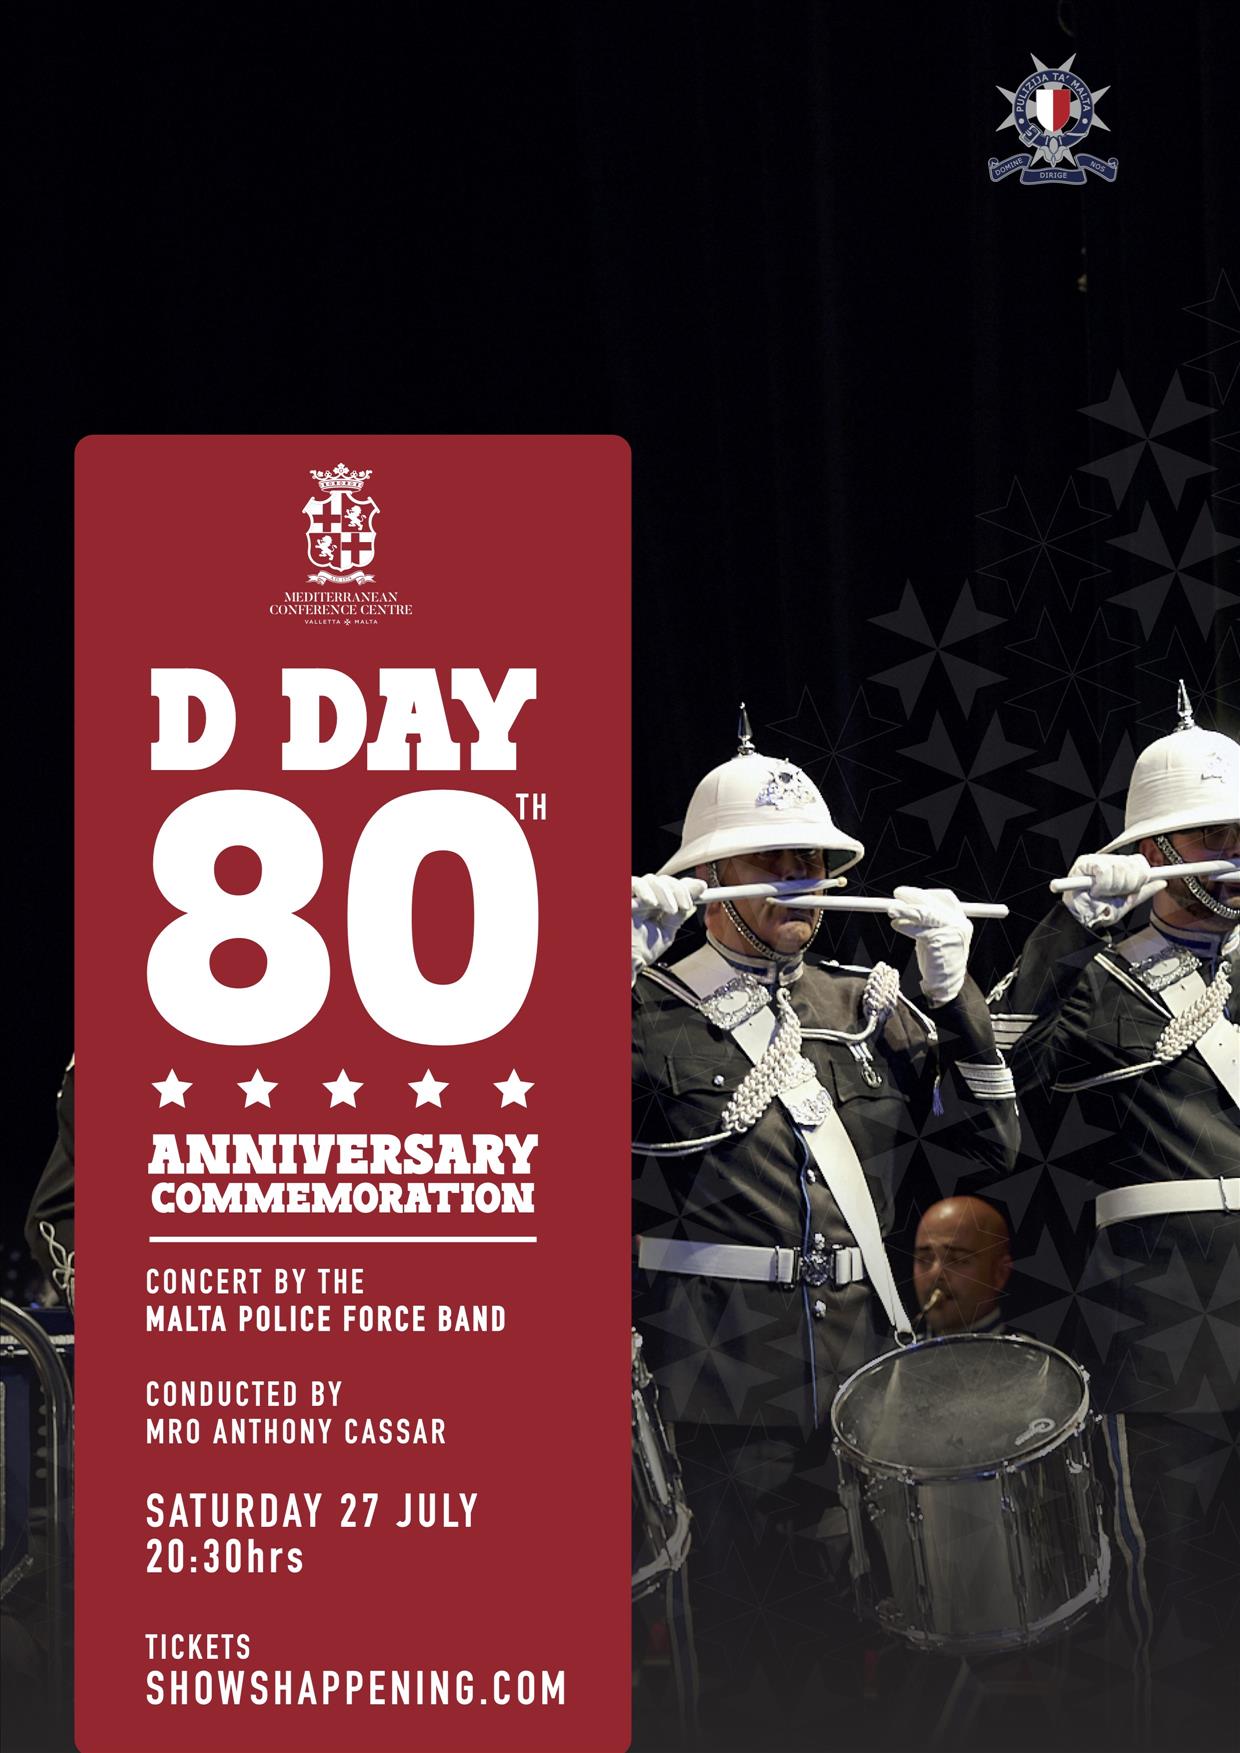 D-DAY 80TH ANNIVERSARY COMMEMORATION - DAY 2